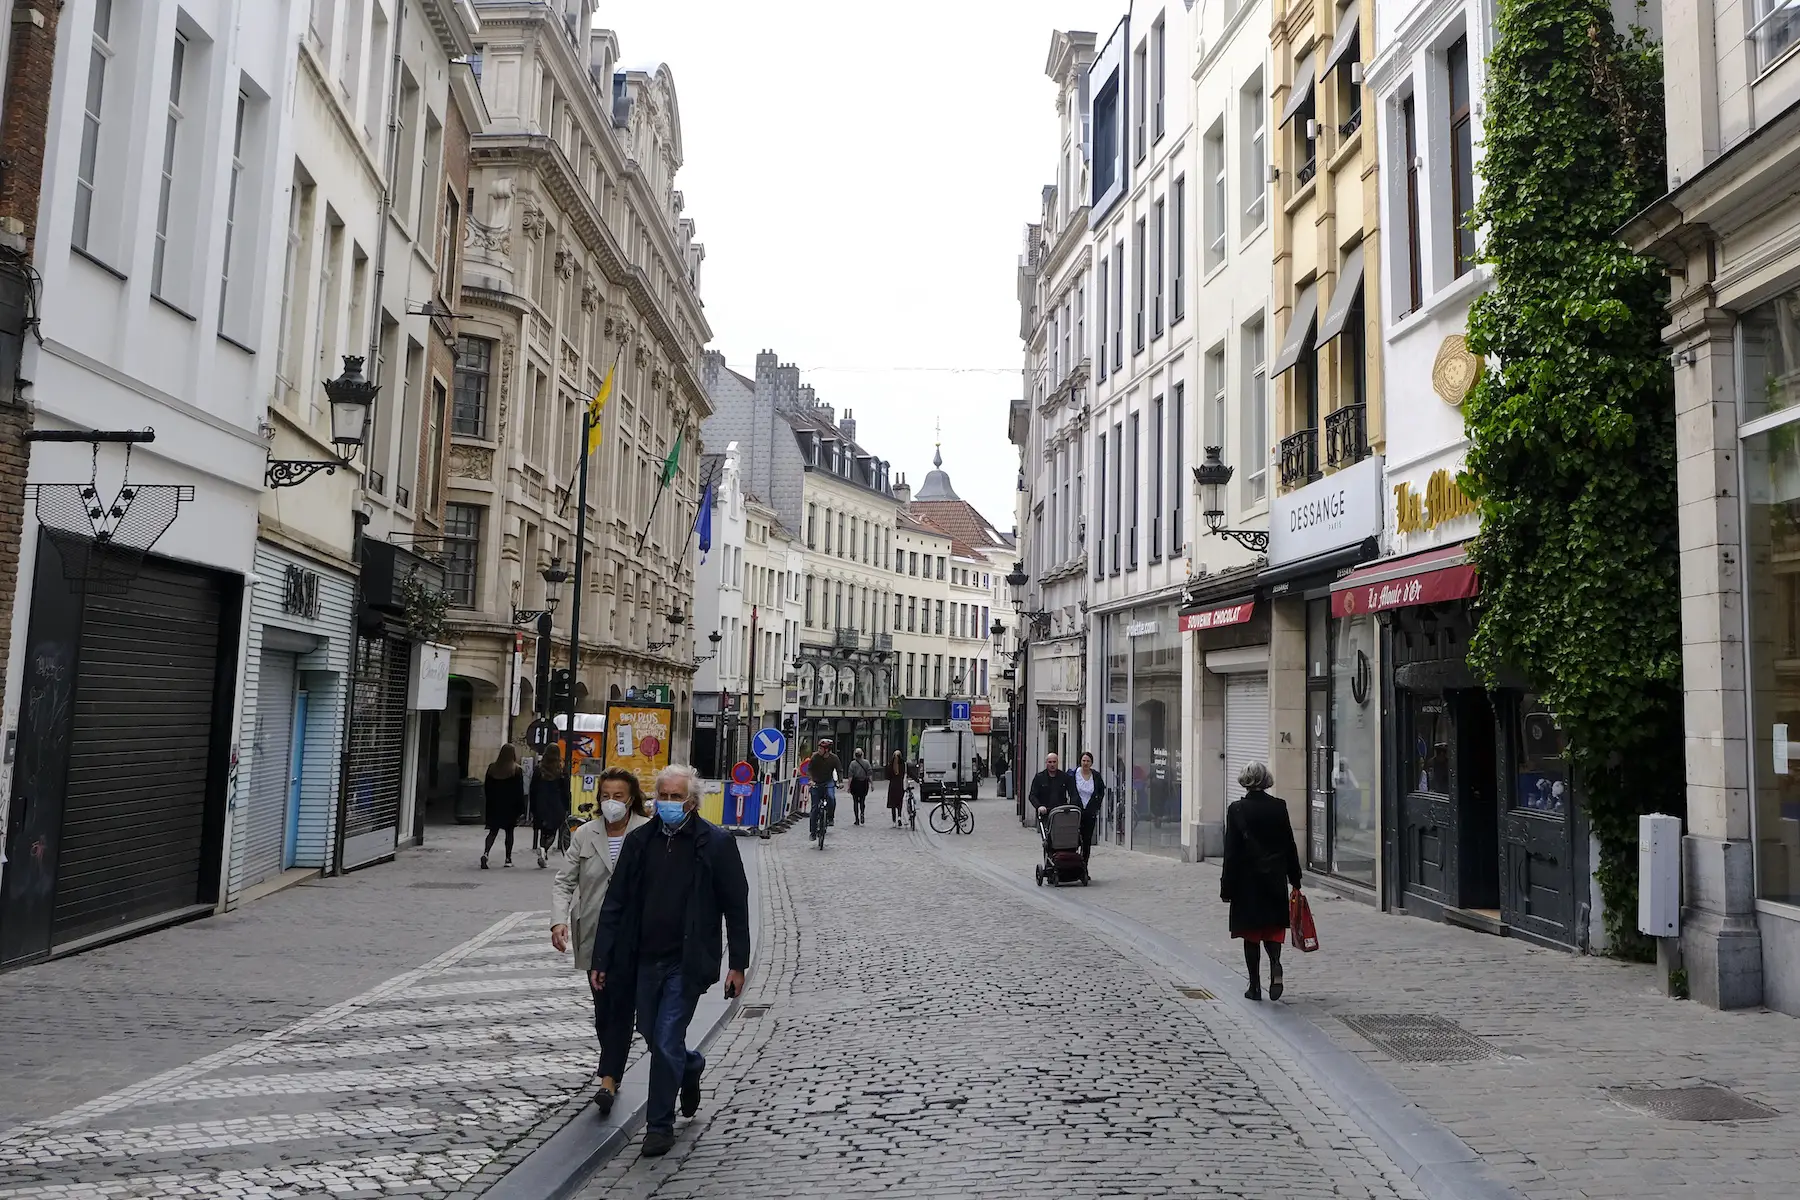 Residents wearing face masks walk along a closed shopping street in Brussels, Belgium during COVID-19 lockdown